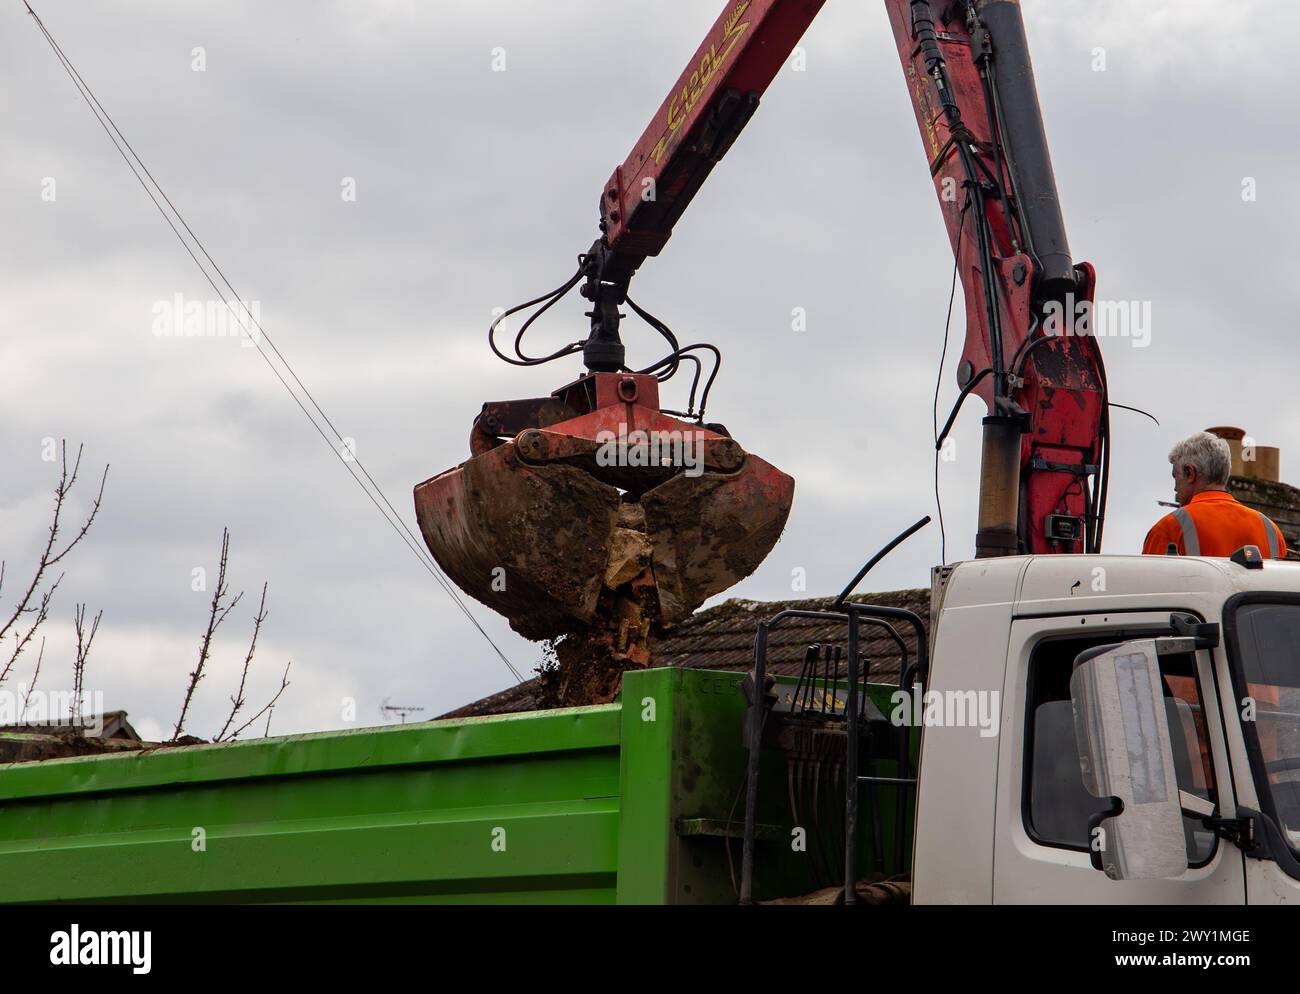 Rubble grab lorry removing stone and soil with a clamshell bucket on a crane. Stock Photo